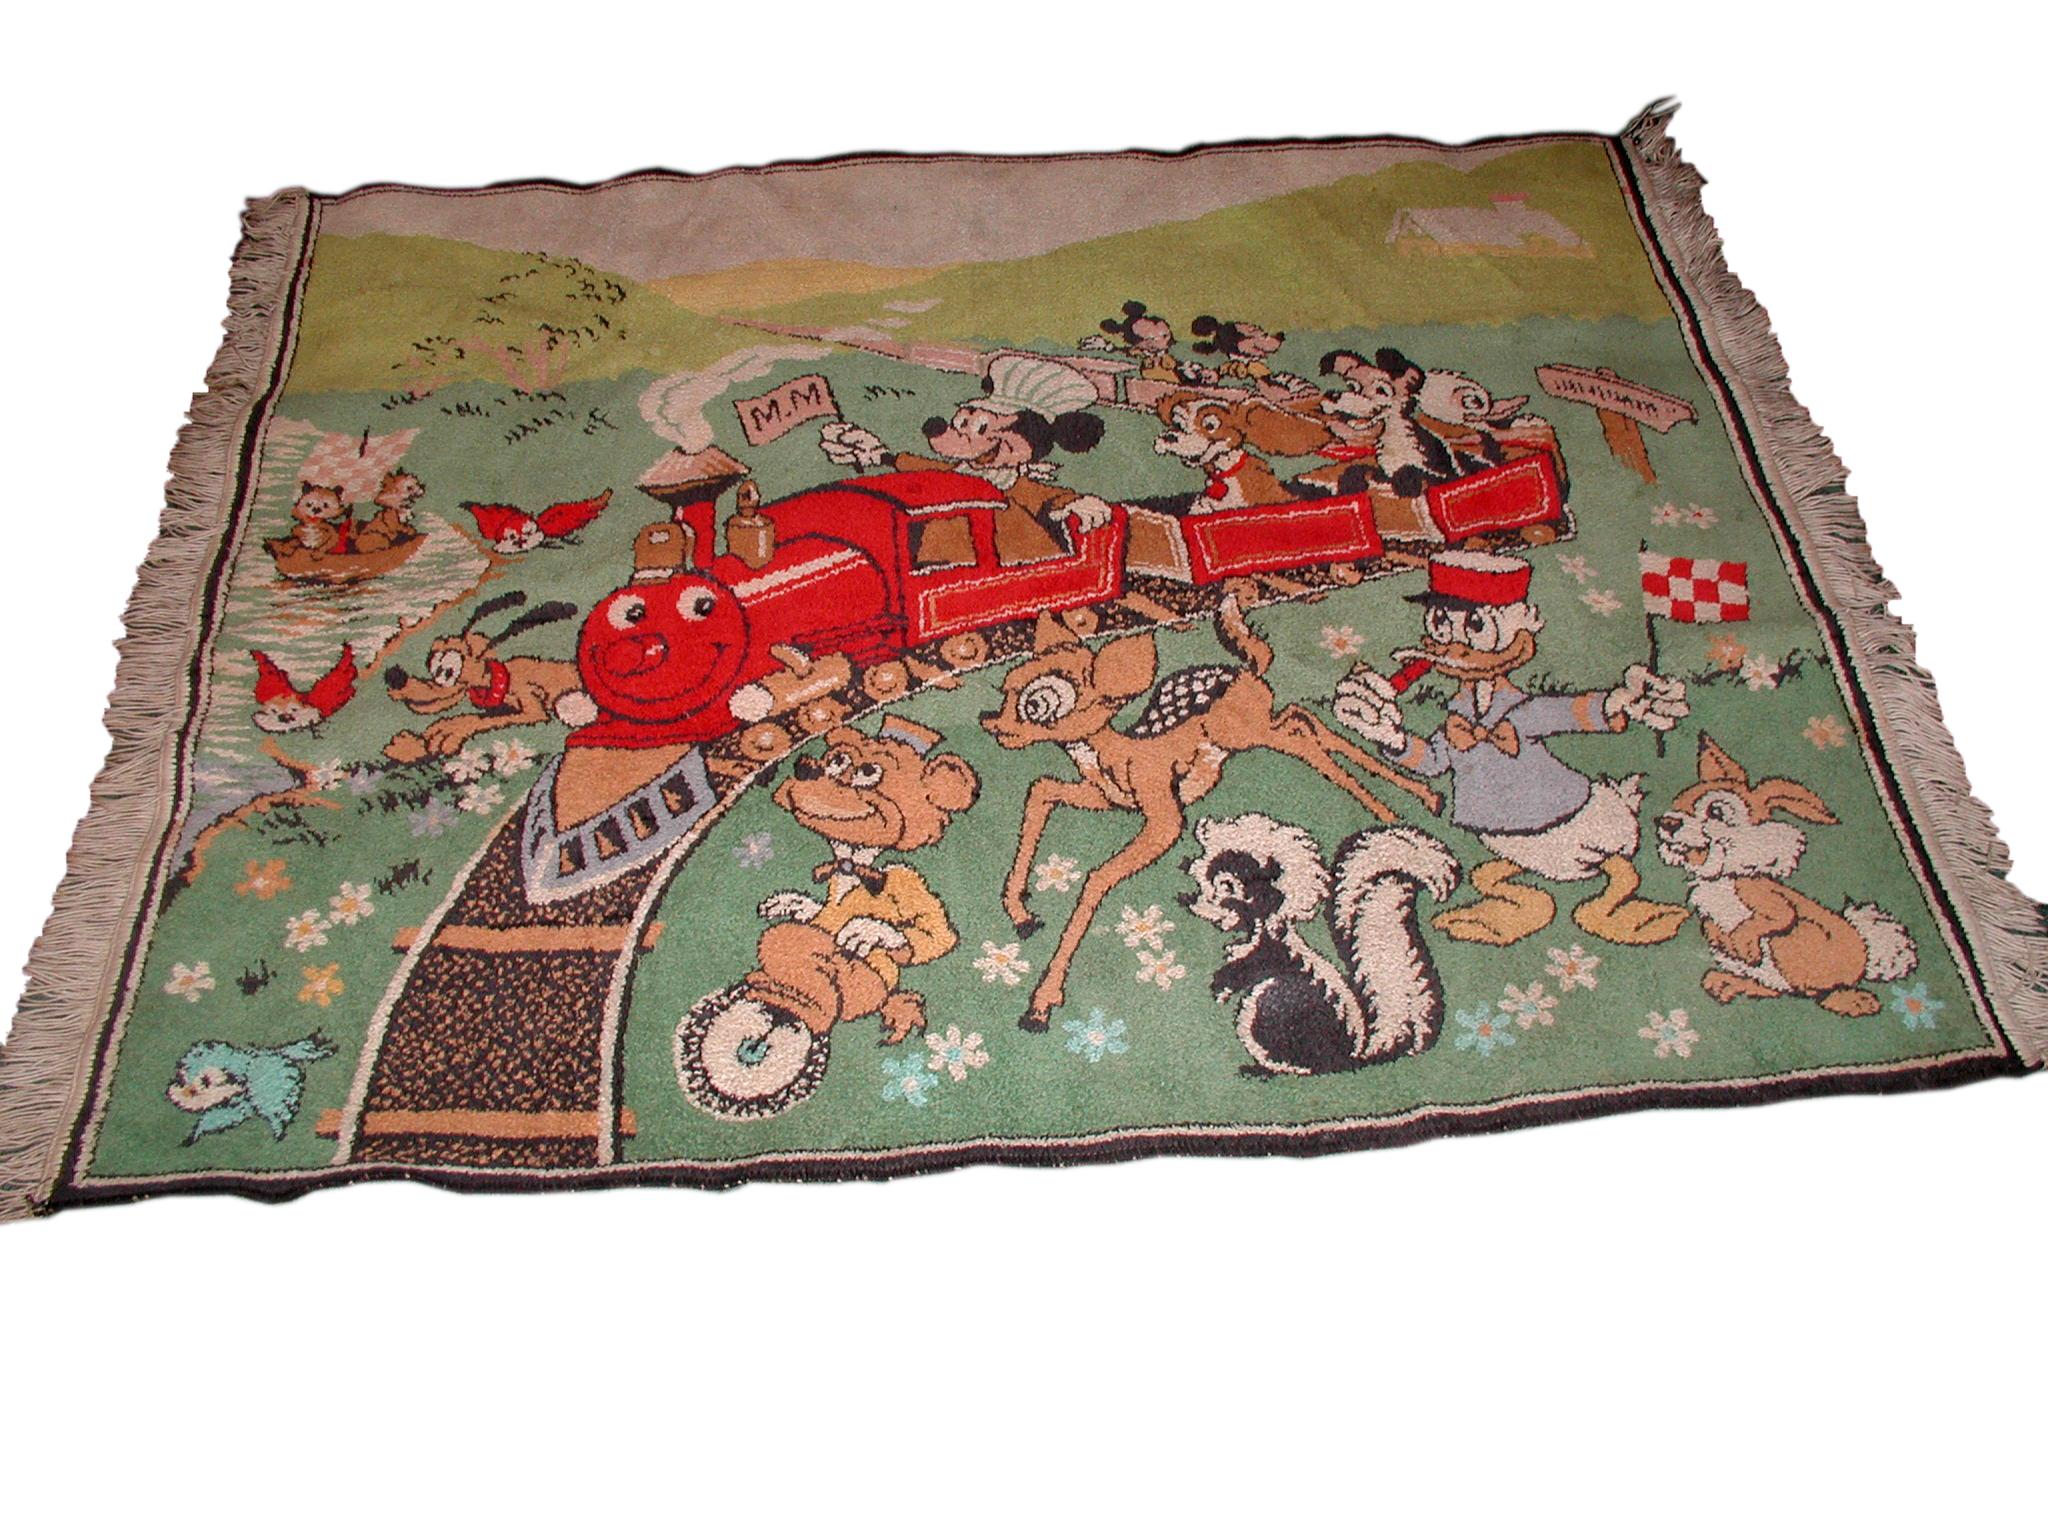 Incredible vintage adn rare Mickey Mouse wool area rug. Mickey is the train engineer with many of his Walt Disney cartoon friends on board including Mickey's niece and nephew, lady and tramp, and Donald Duck's nephew Huey.
Observing and cheering